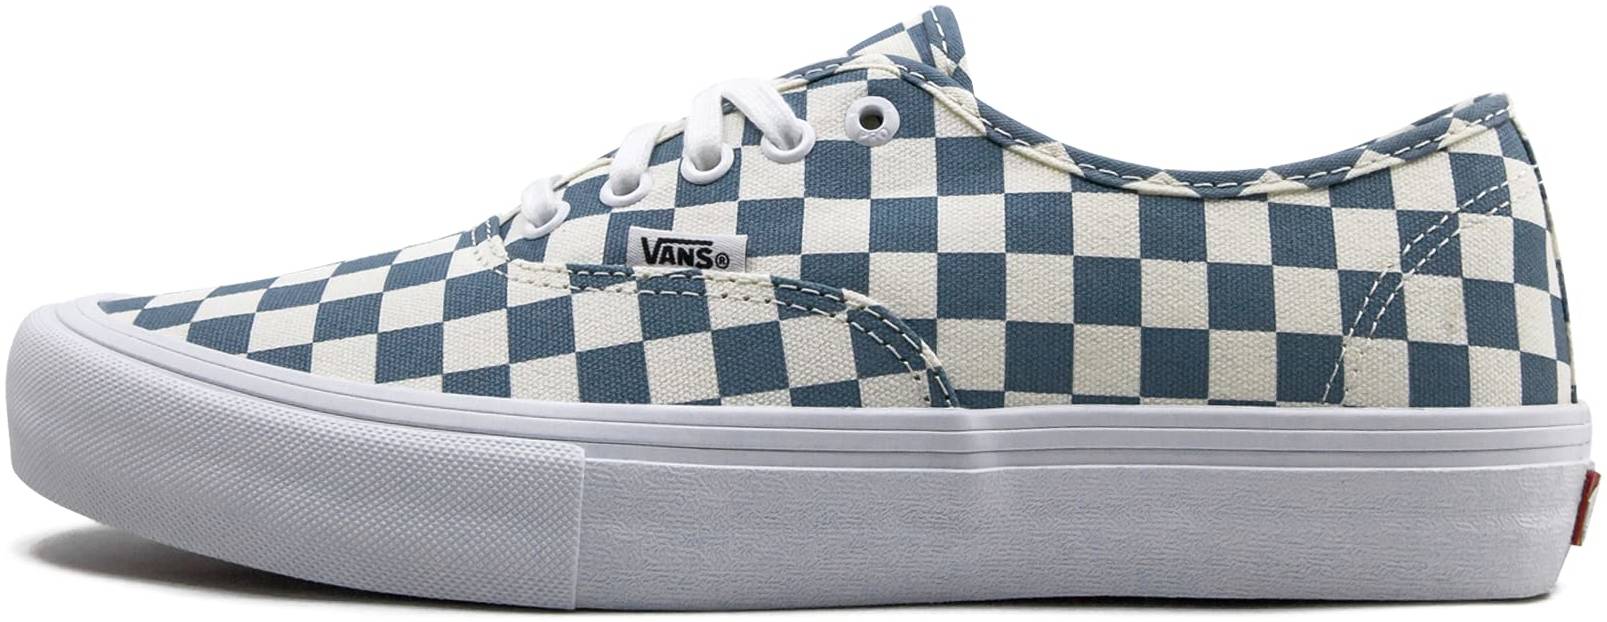 VANS Zapatillas Sidewall Authentic sidewall Palm Tree checkerboard Mujer Azul sneakers in blue + red (only £47) Mairie-ascainShops | Високі кеди vans оригинал